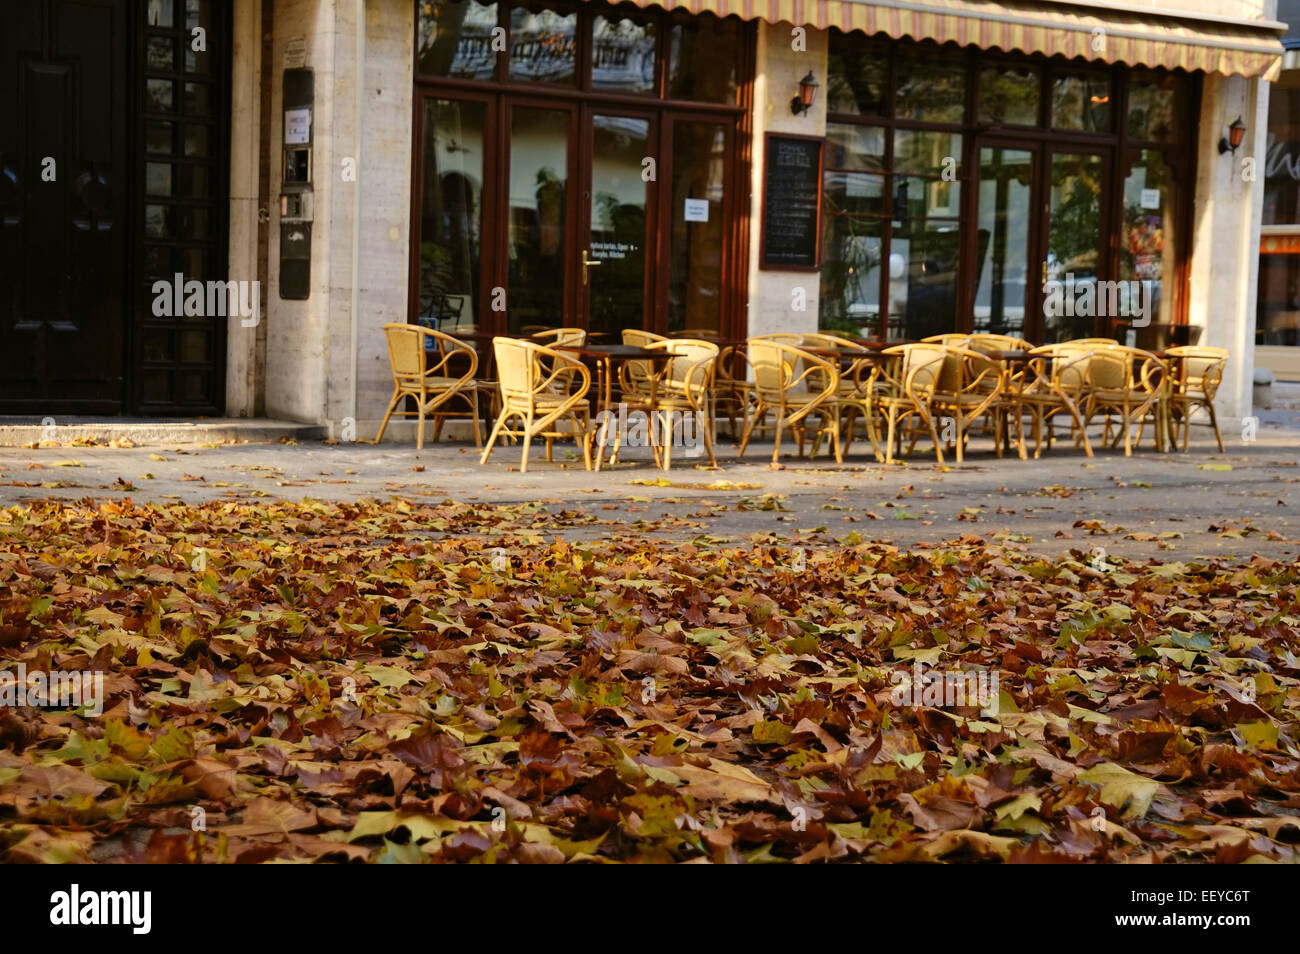 Autumn leaves in front of café Stock Photo